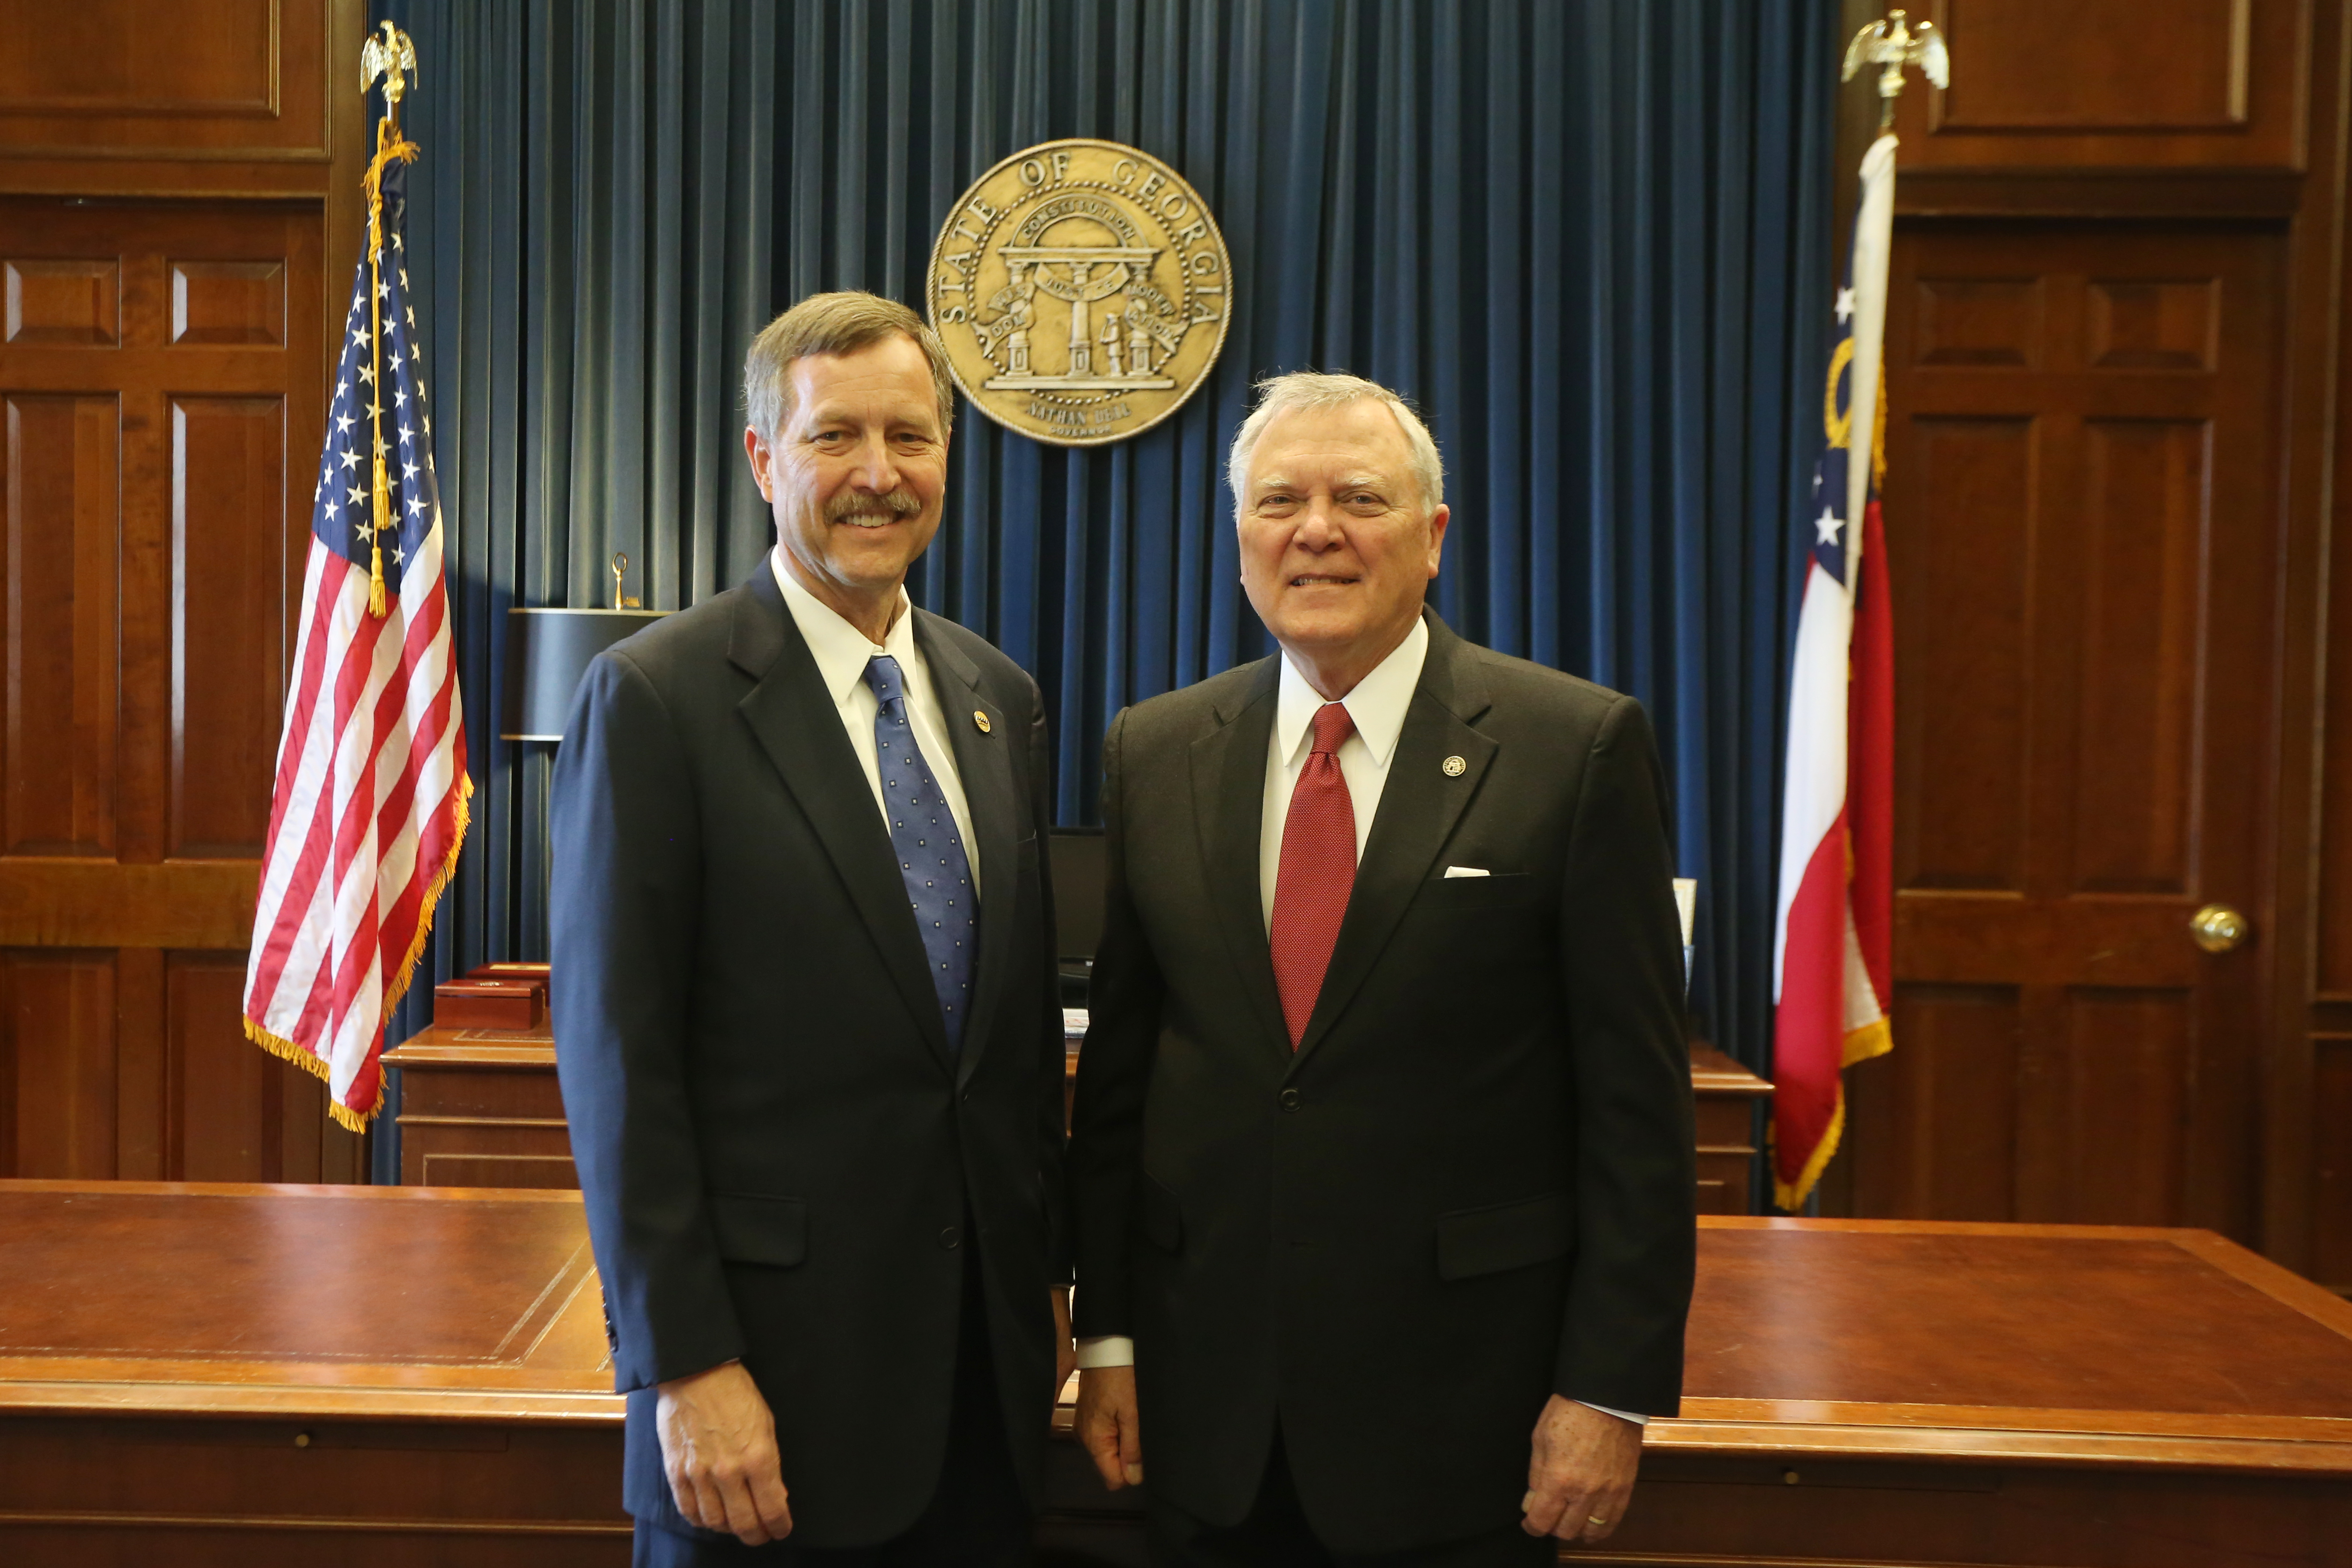 Randy Hatcher and Governor Deal